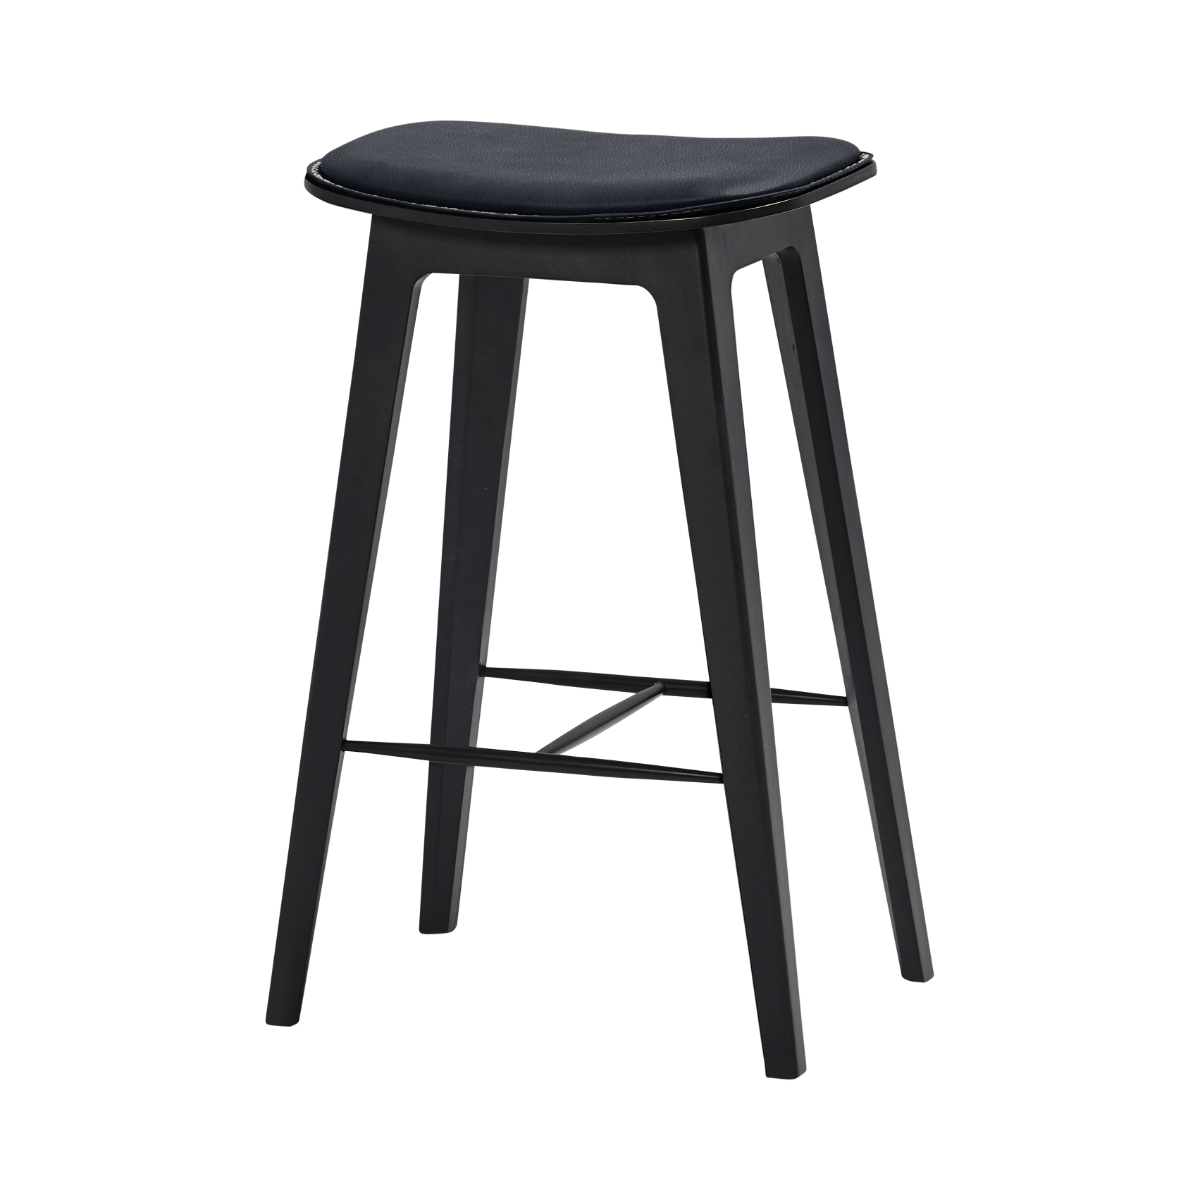 variant_8593216% | Nordic Bar Stool - Beech with stitches [Contract] - 73 cm Terra Black | SACKit